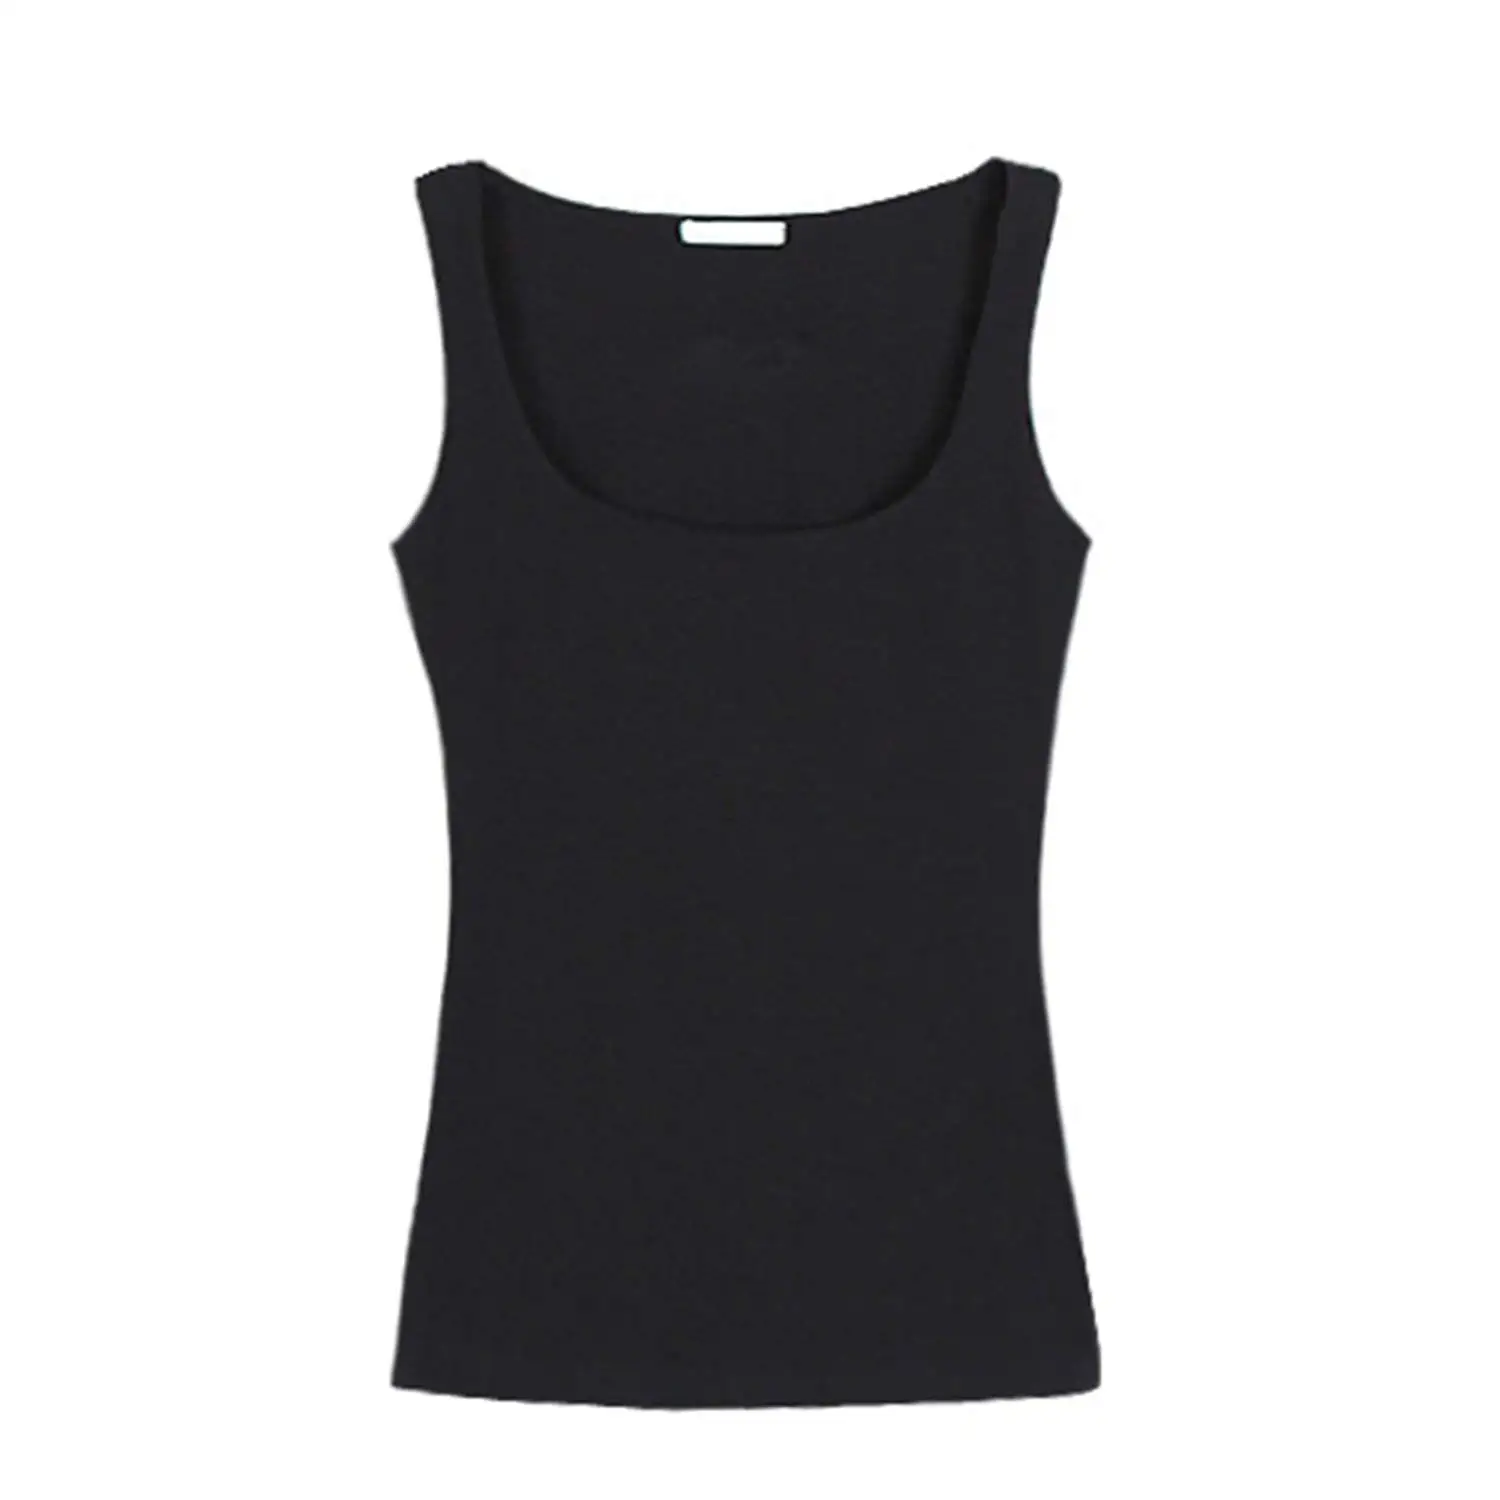 Cheap Low Cut Cleavage Tops, find Low Cut Cleavage Tops deals on line ...